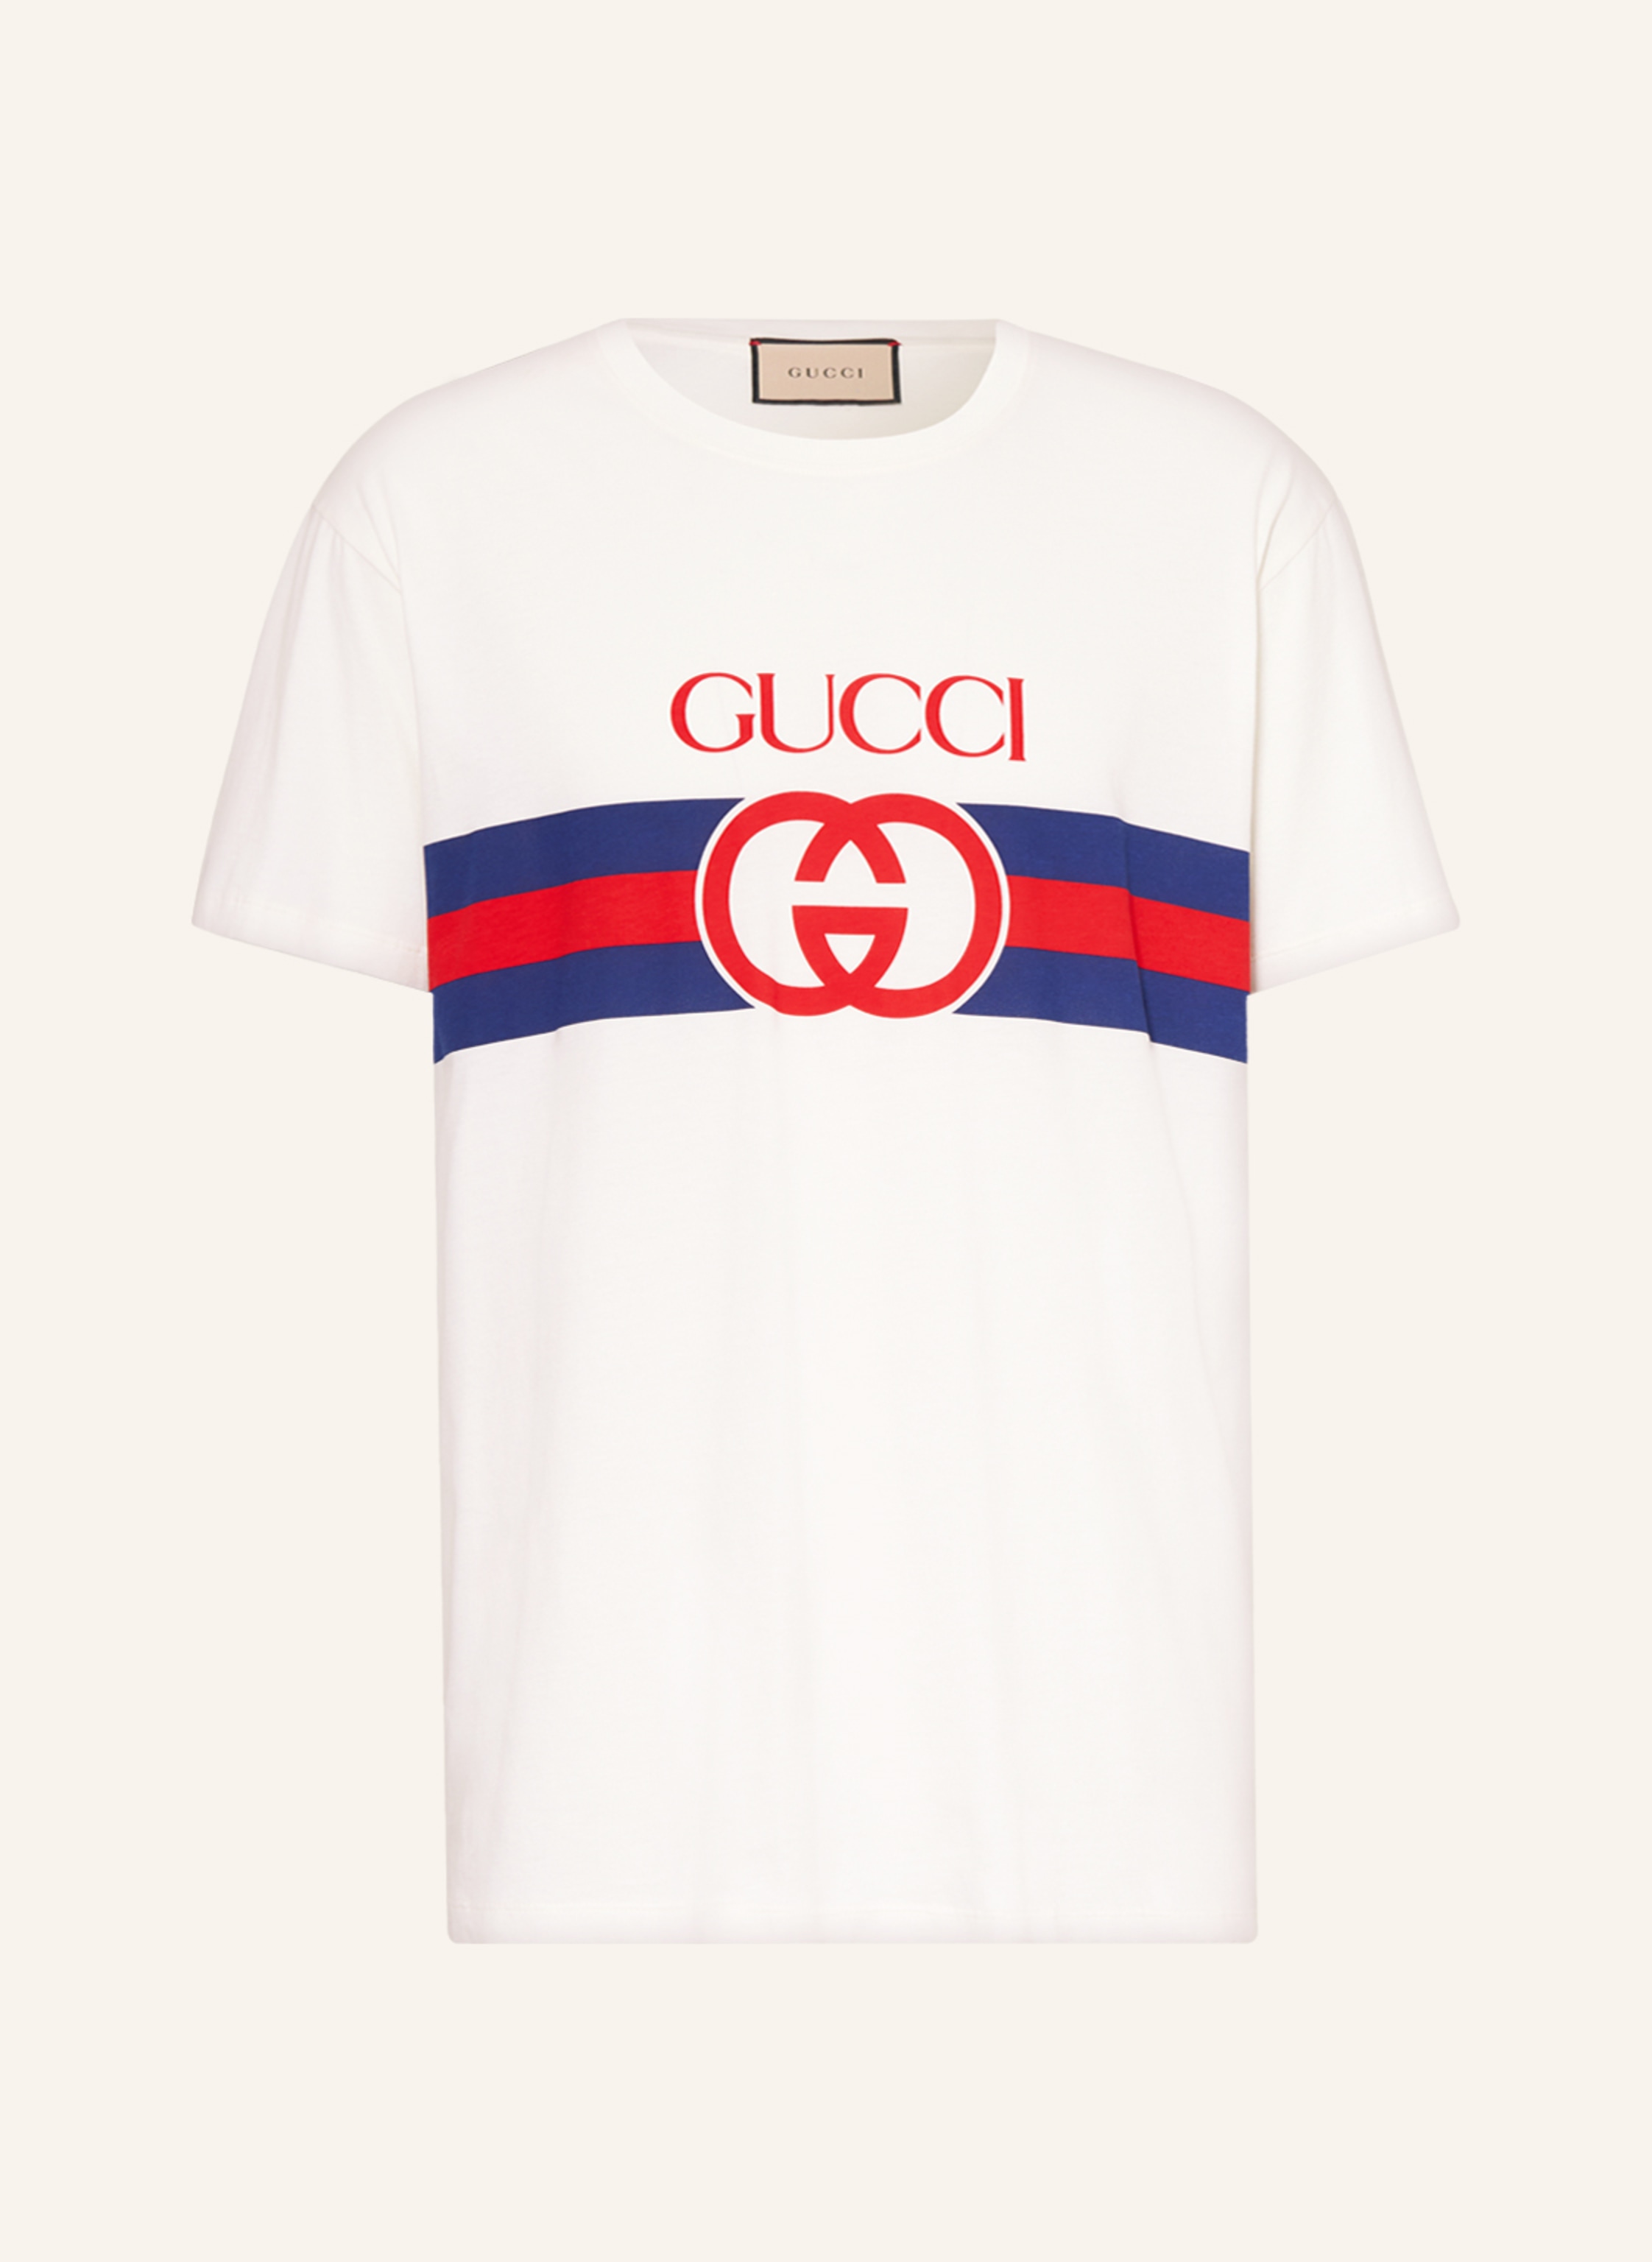 GUCCI T-shirt in white/ dark blue/ red